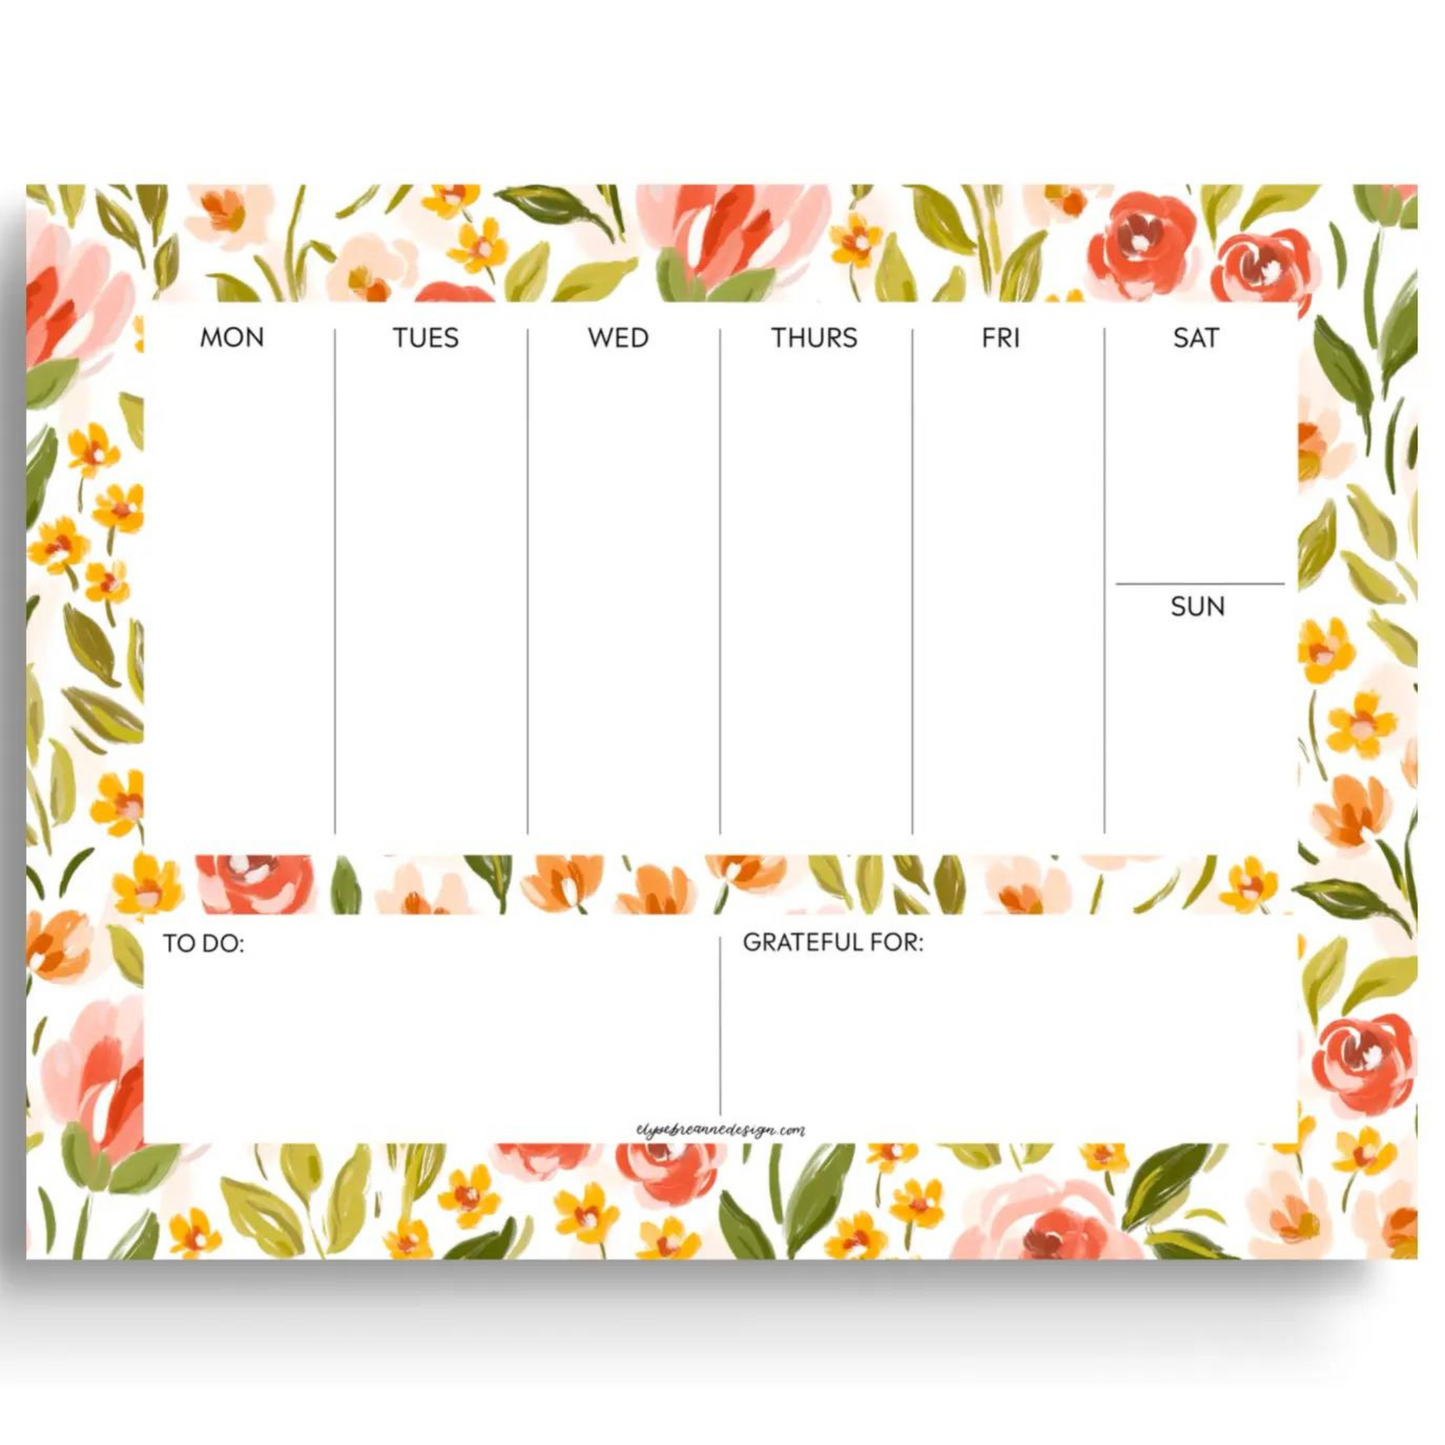 Stay on top of your schedule with this adorable weekly planner note pad.